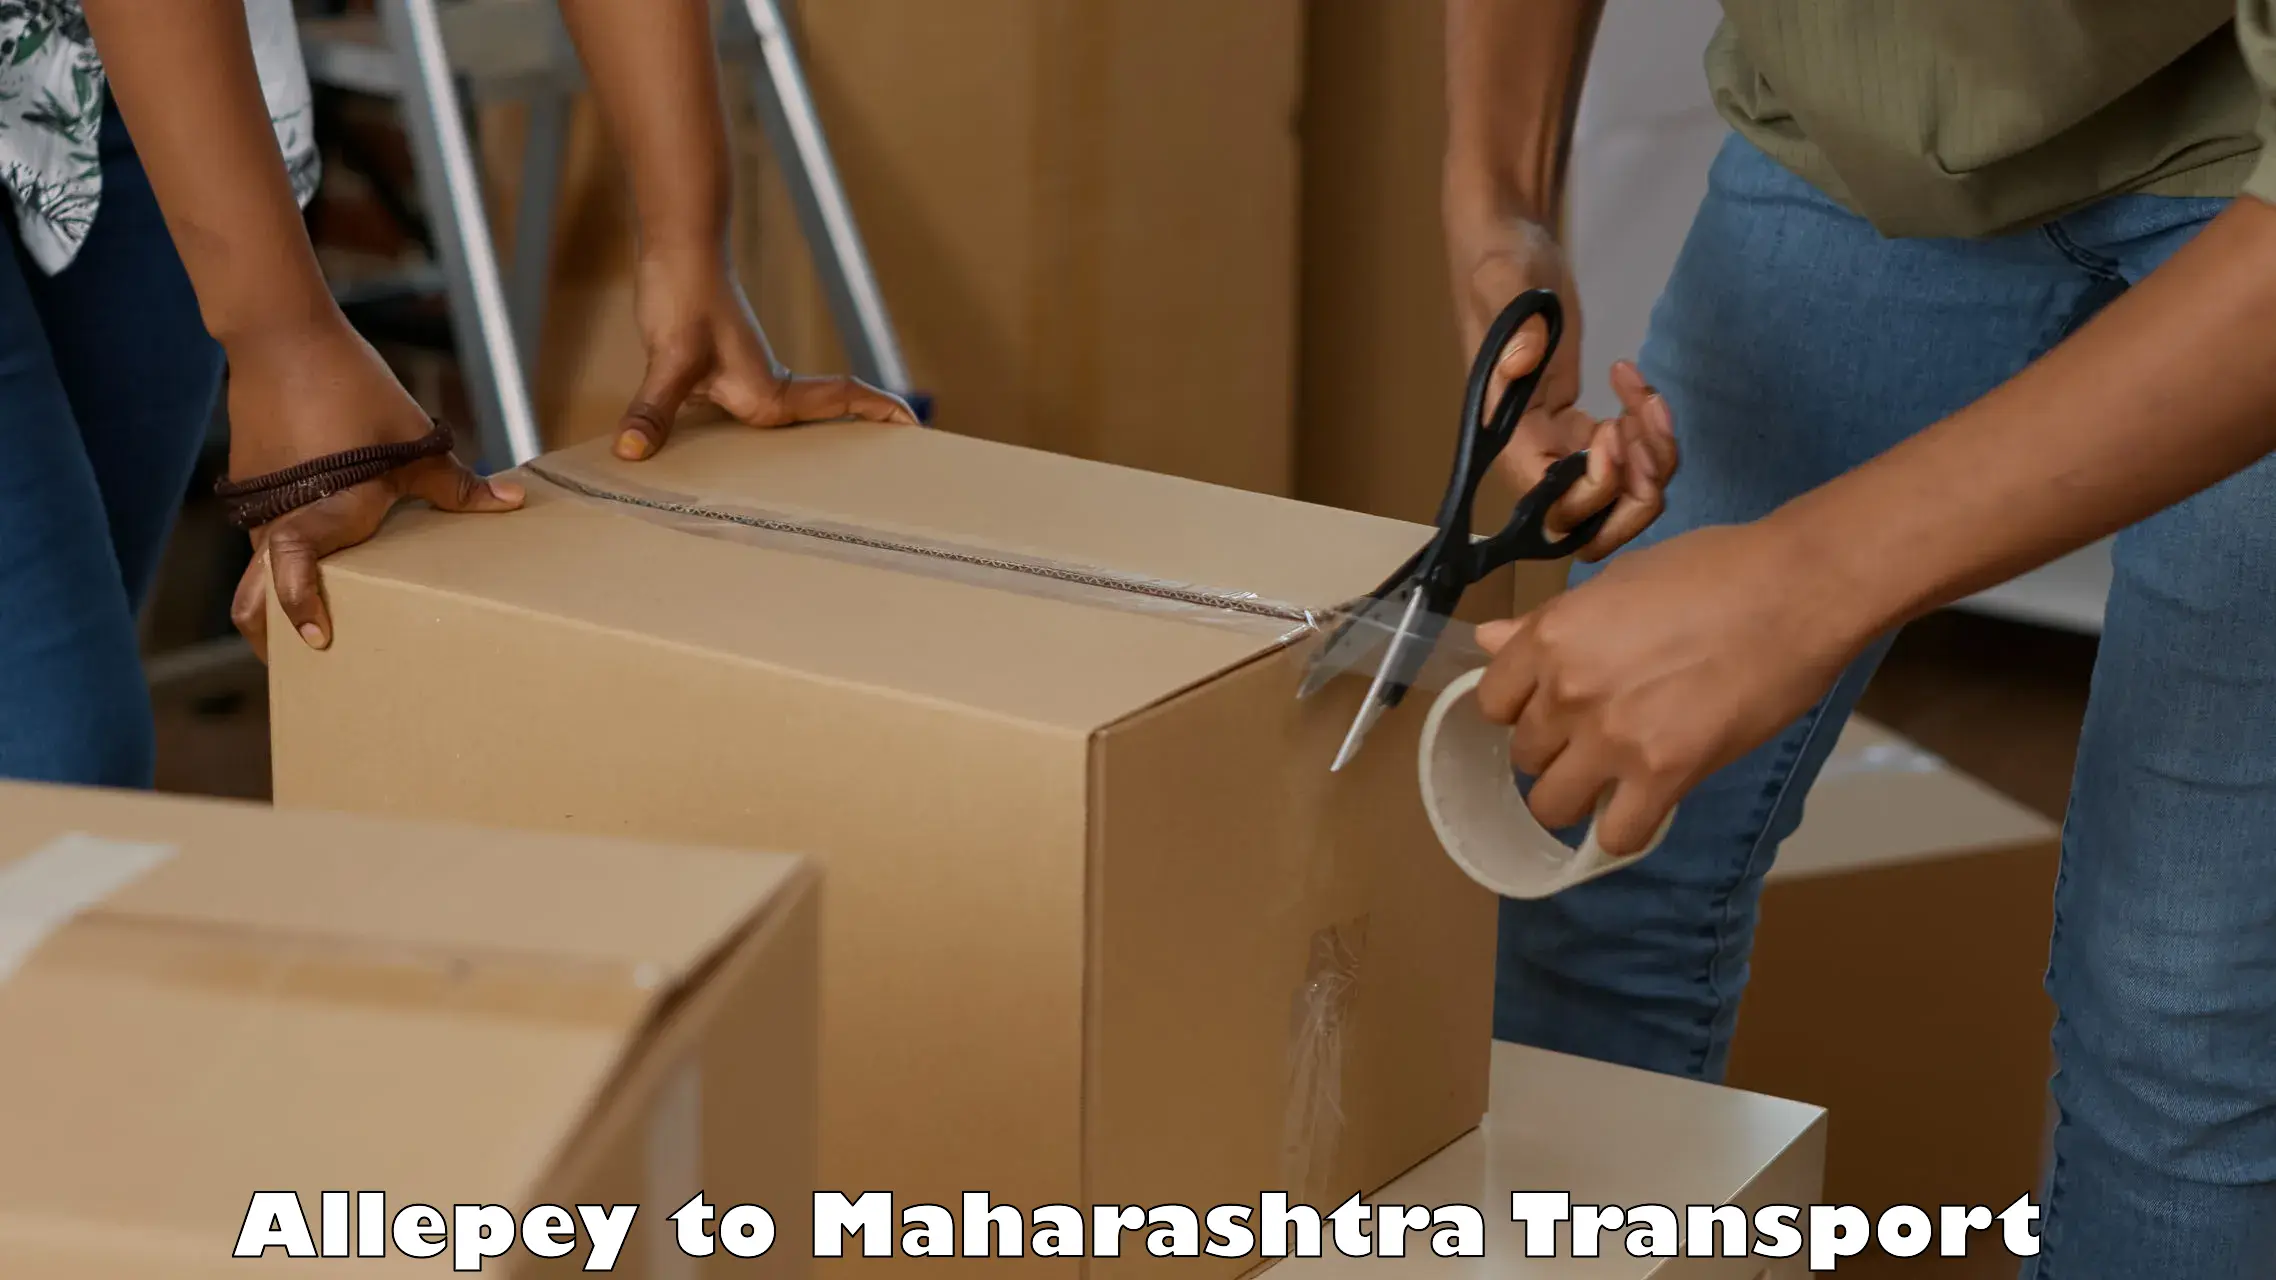 Container transport service Allepey to Maharashtra